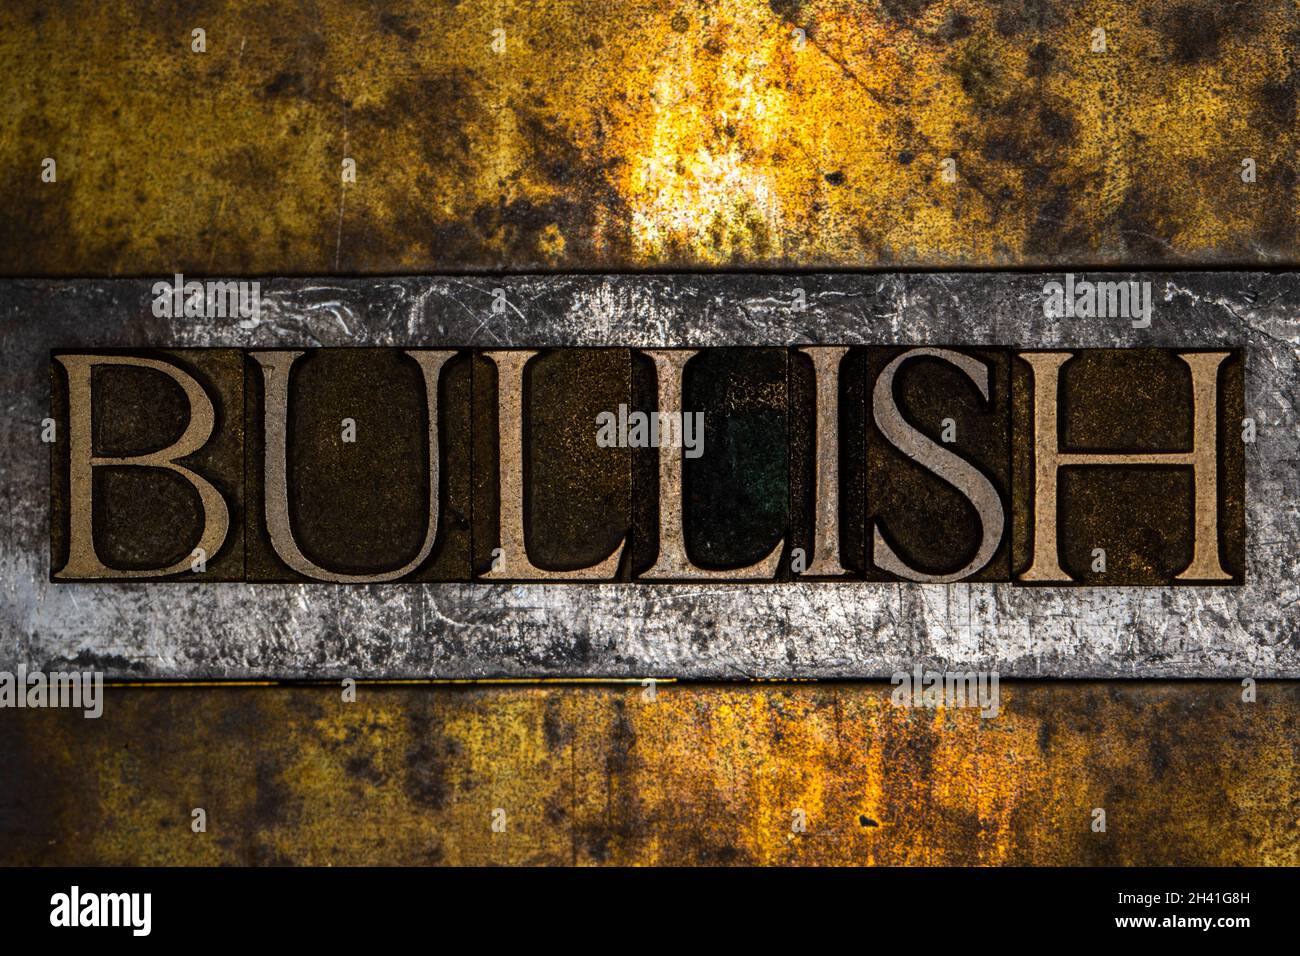 Bullish text on grunge textured gold and copper background Stock Photo